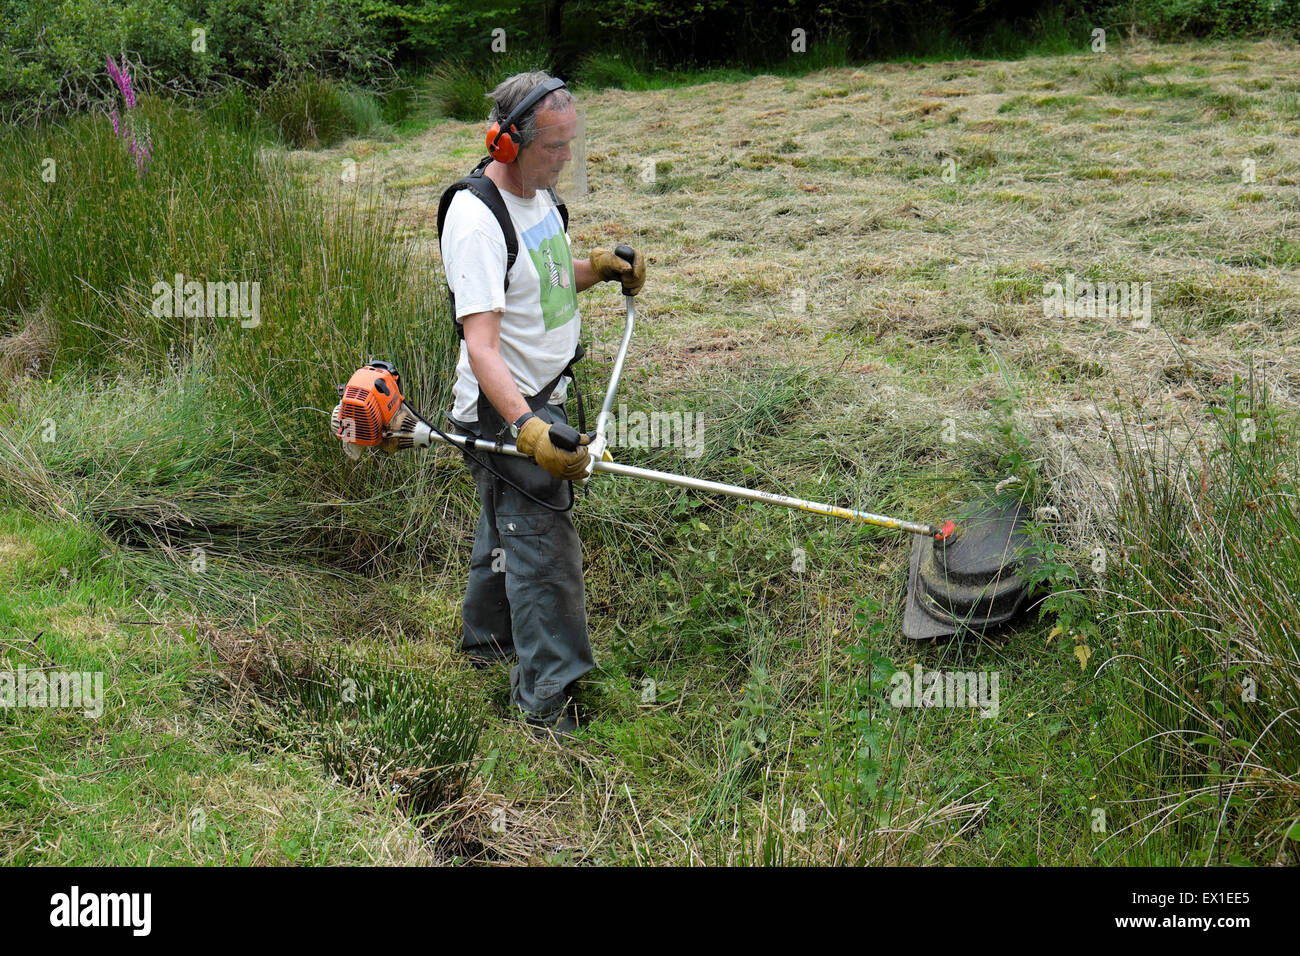 A person wearing safety equipment strimming reeds in a field in Carmarthenshire Wales UK  KATHY DEWITT Stock Photo